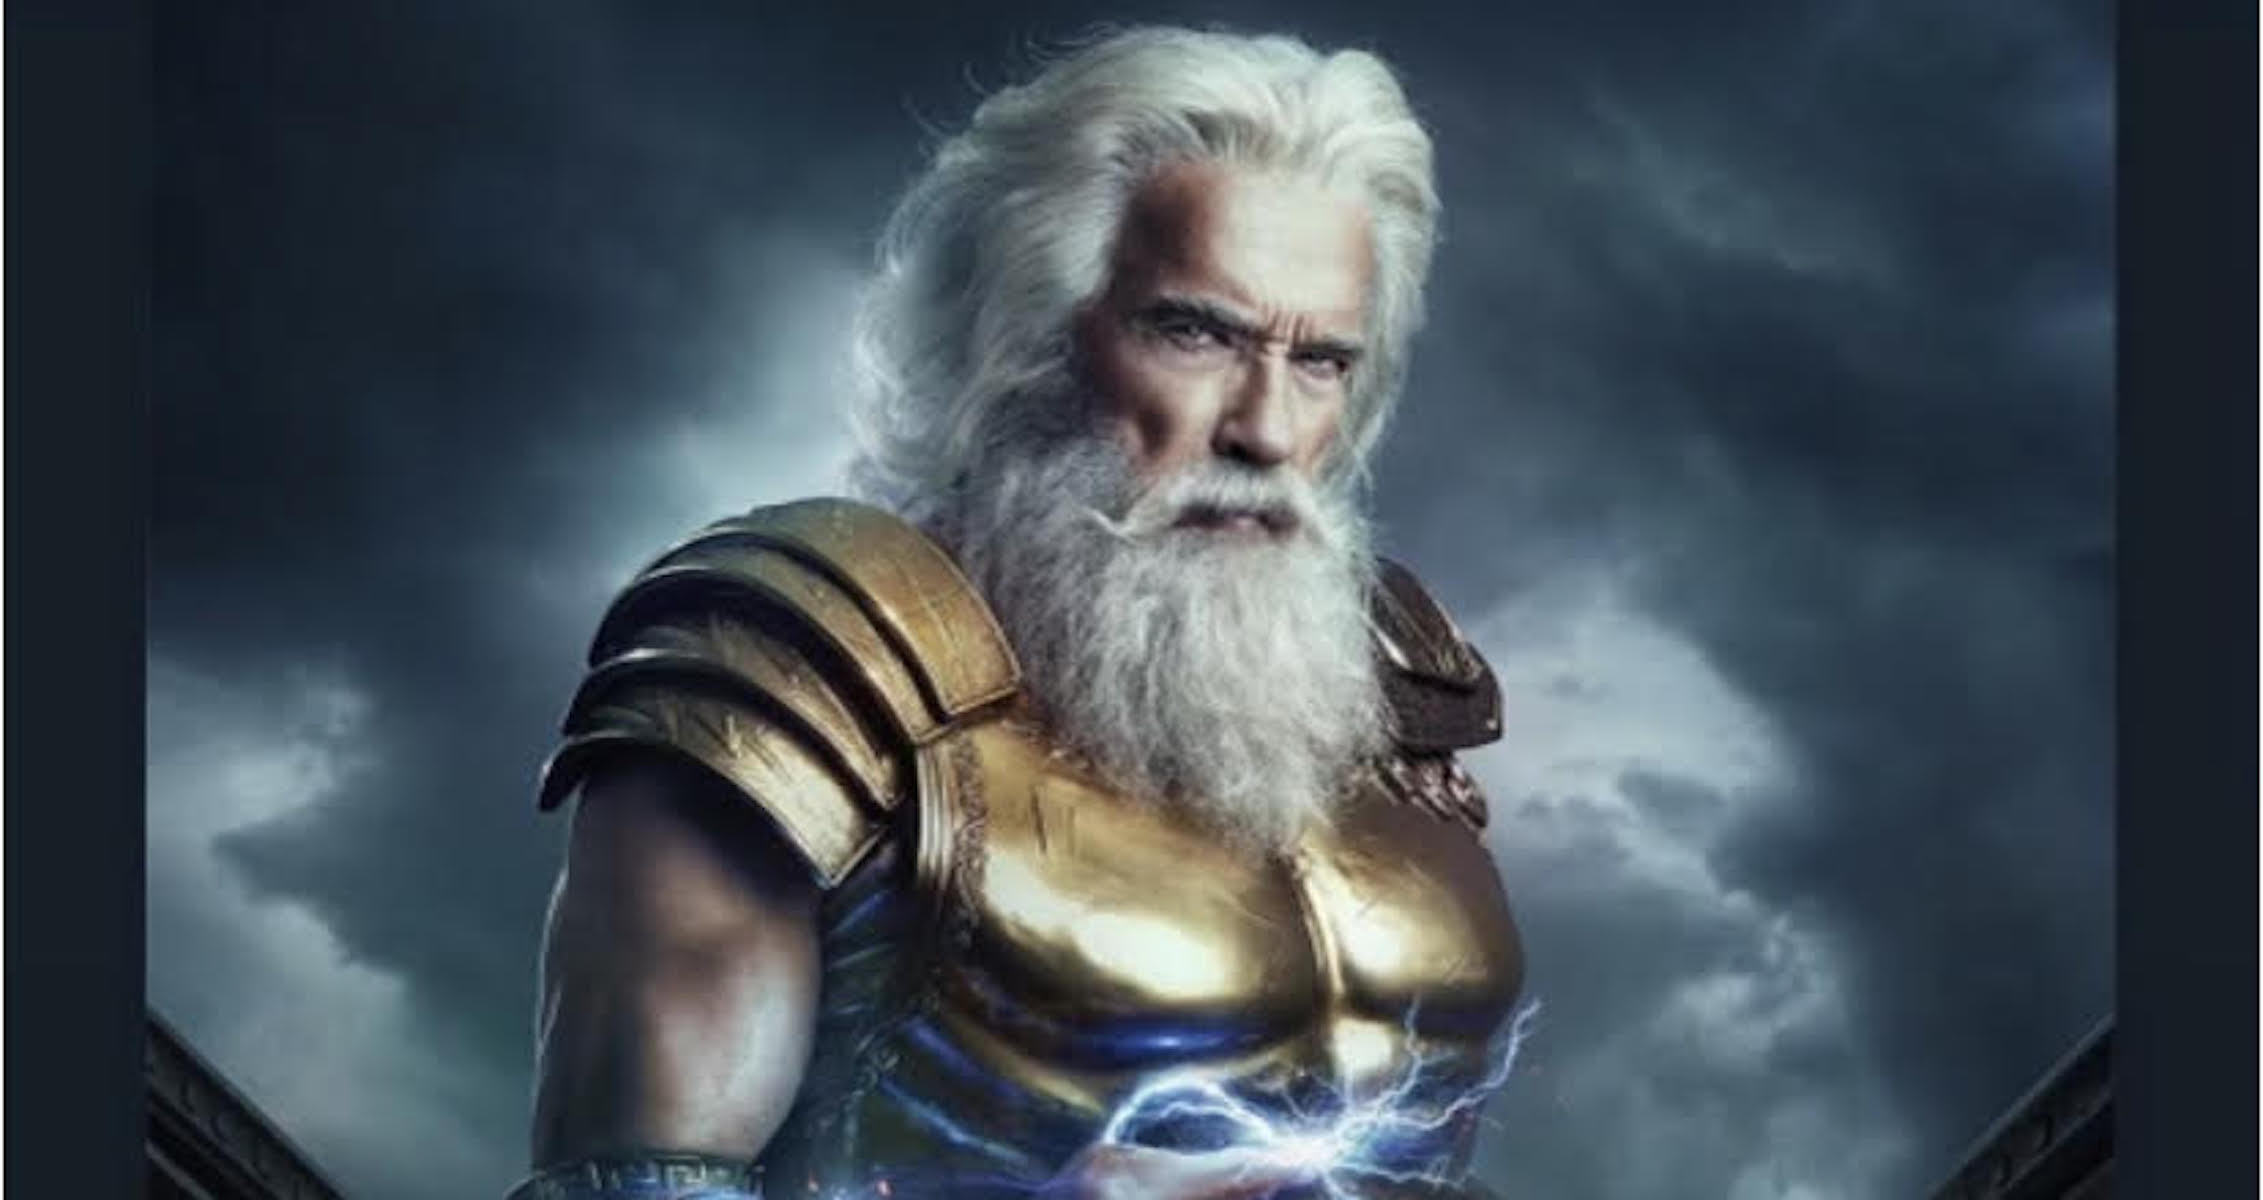 Arnold Schwarzenegger Teases New Project Featuring Himself As Zeus